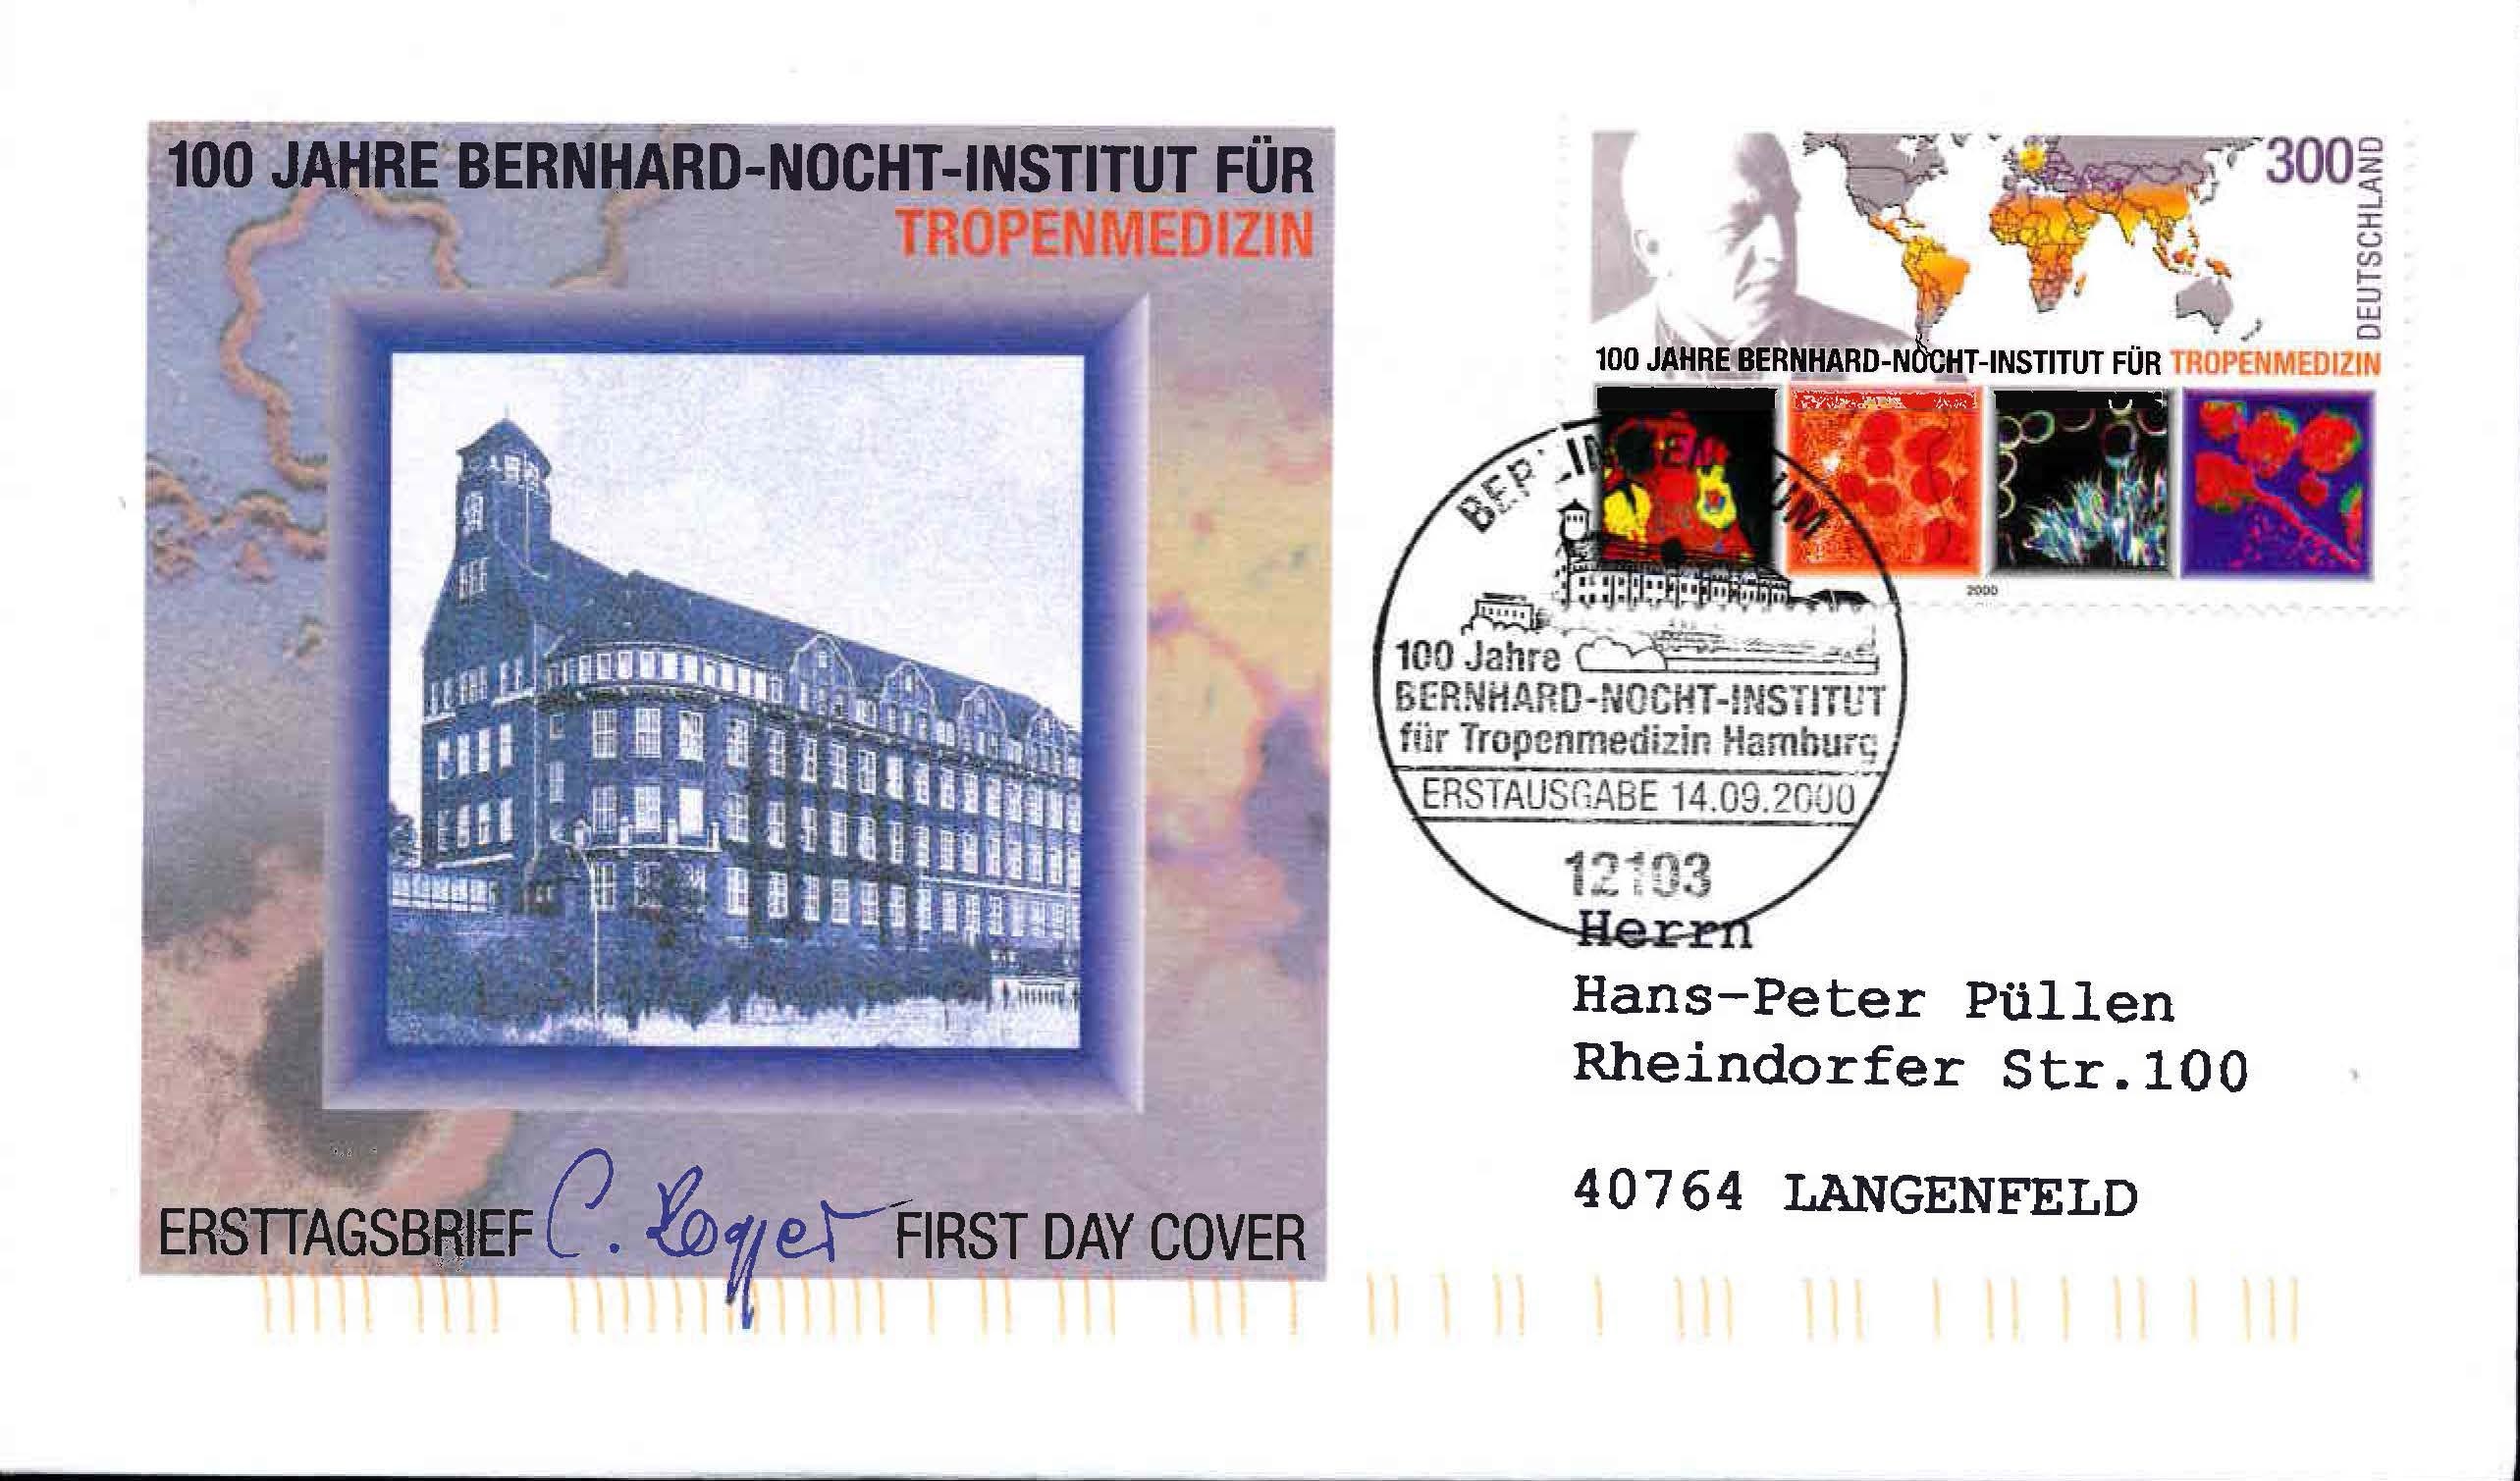 Germany Scott 2101 First Day Cover, Cachet 2, Berlin Cancellation - Sent Through the Mail to Langenfeld